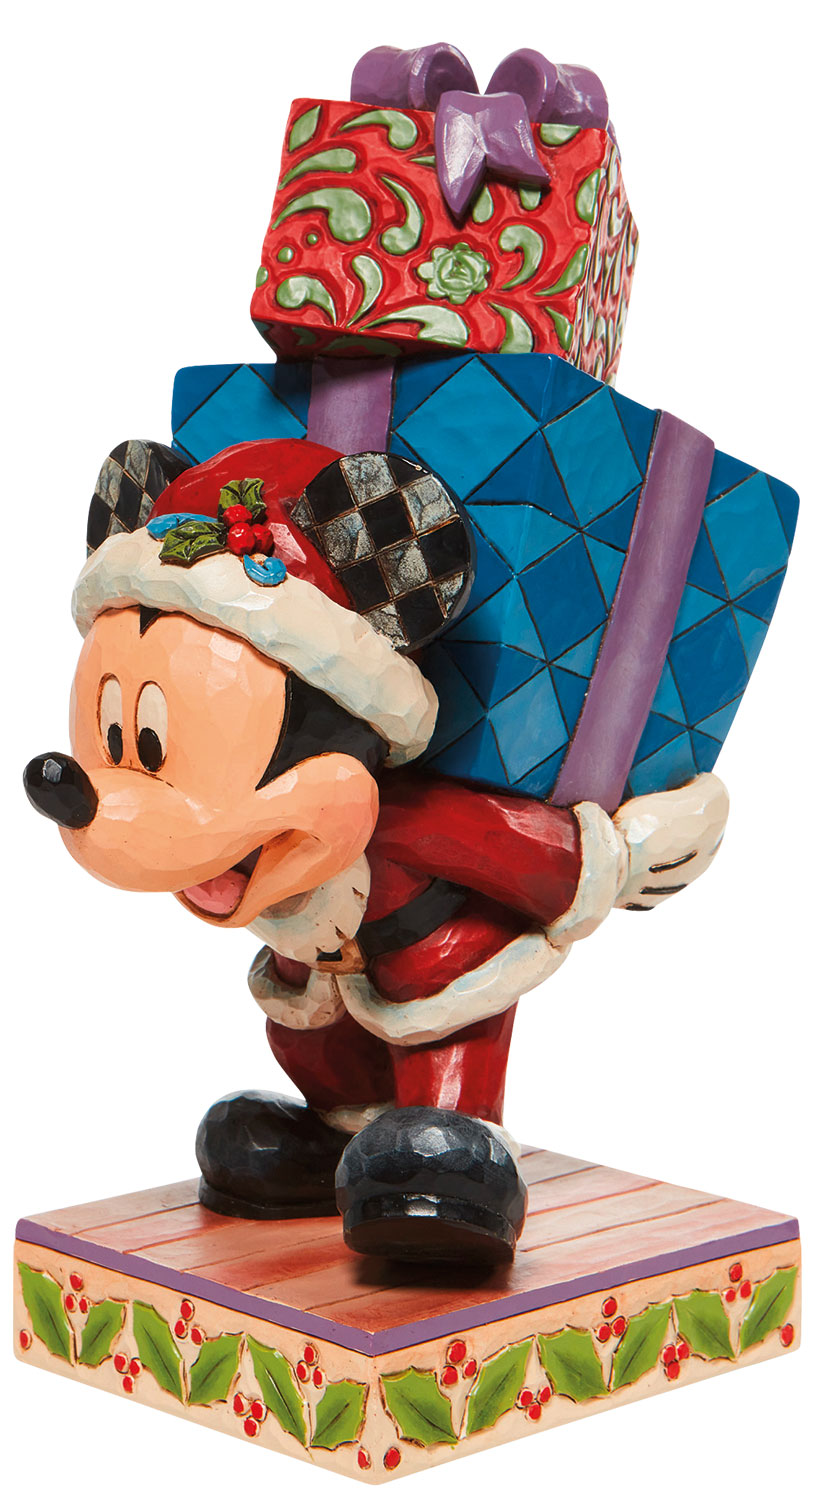 Sculpture "Mickey with Gifts", cast by Jim Shore